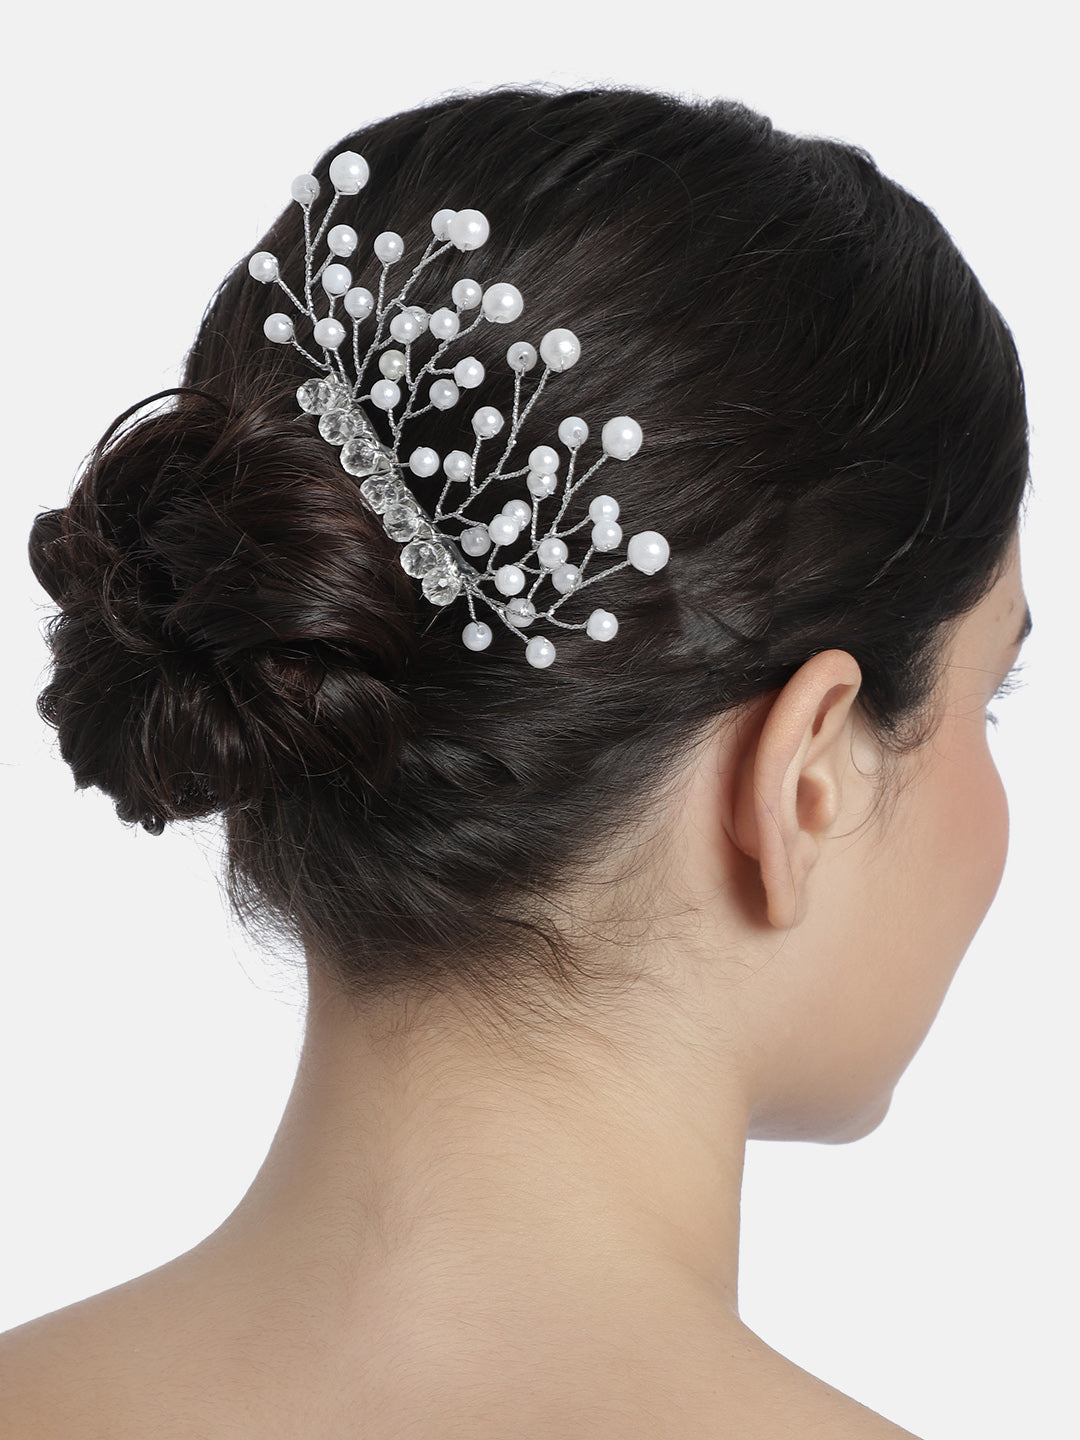 LAIDA Women Silver-Toned & White Embellished Statement Comb Pin